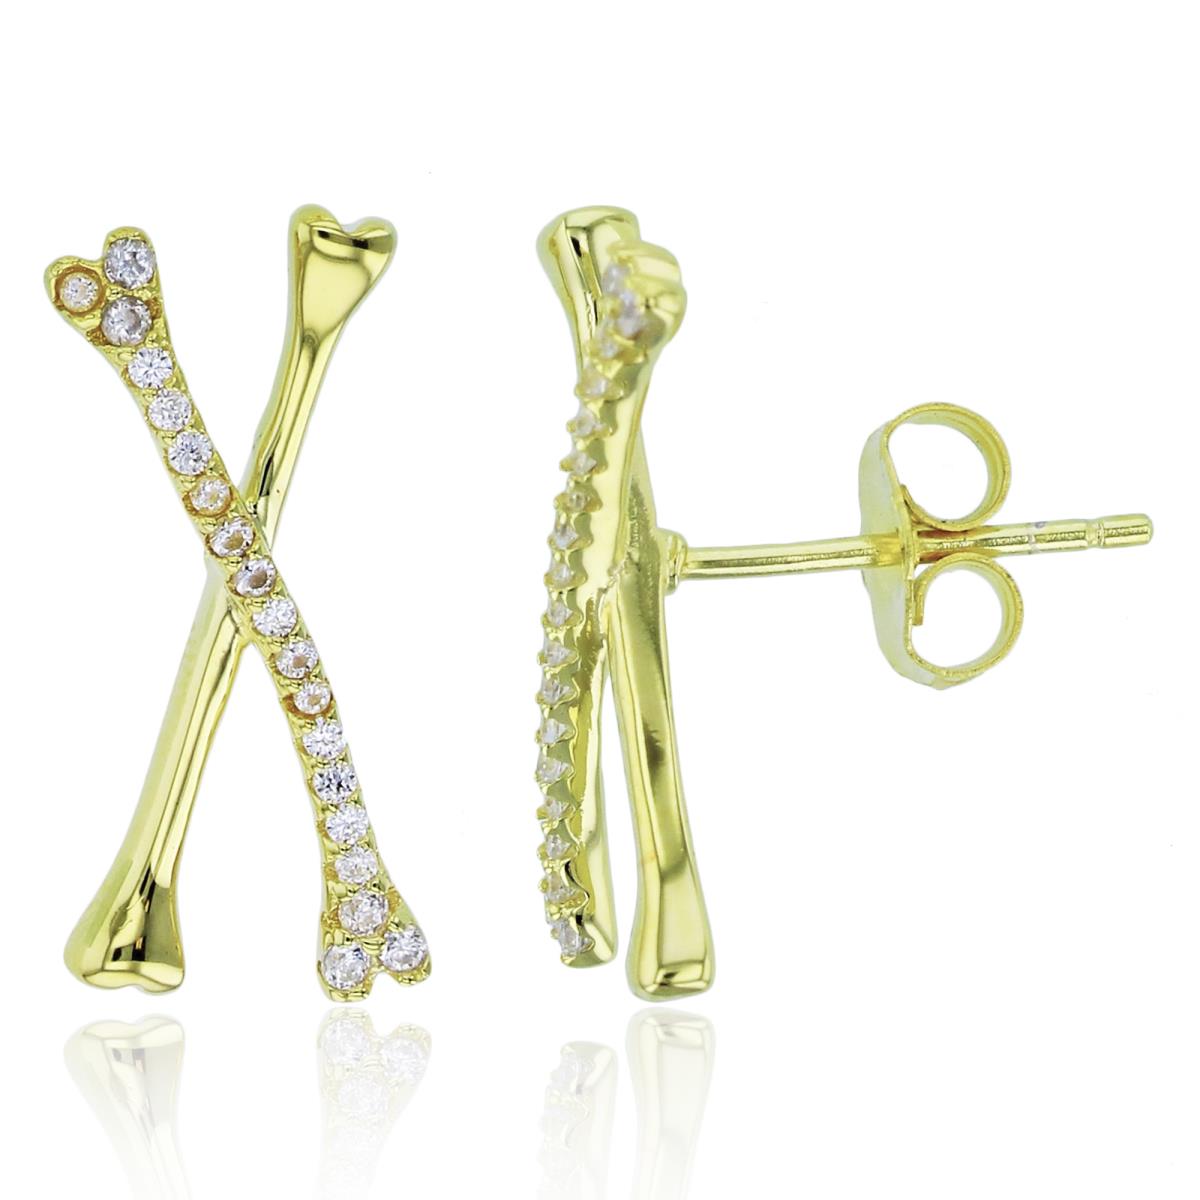 Sterling Silver+1Micron Yellow Gold Rnd CZ "X" Stud Earrings